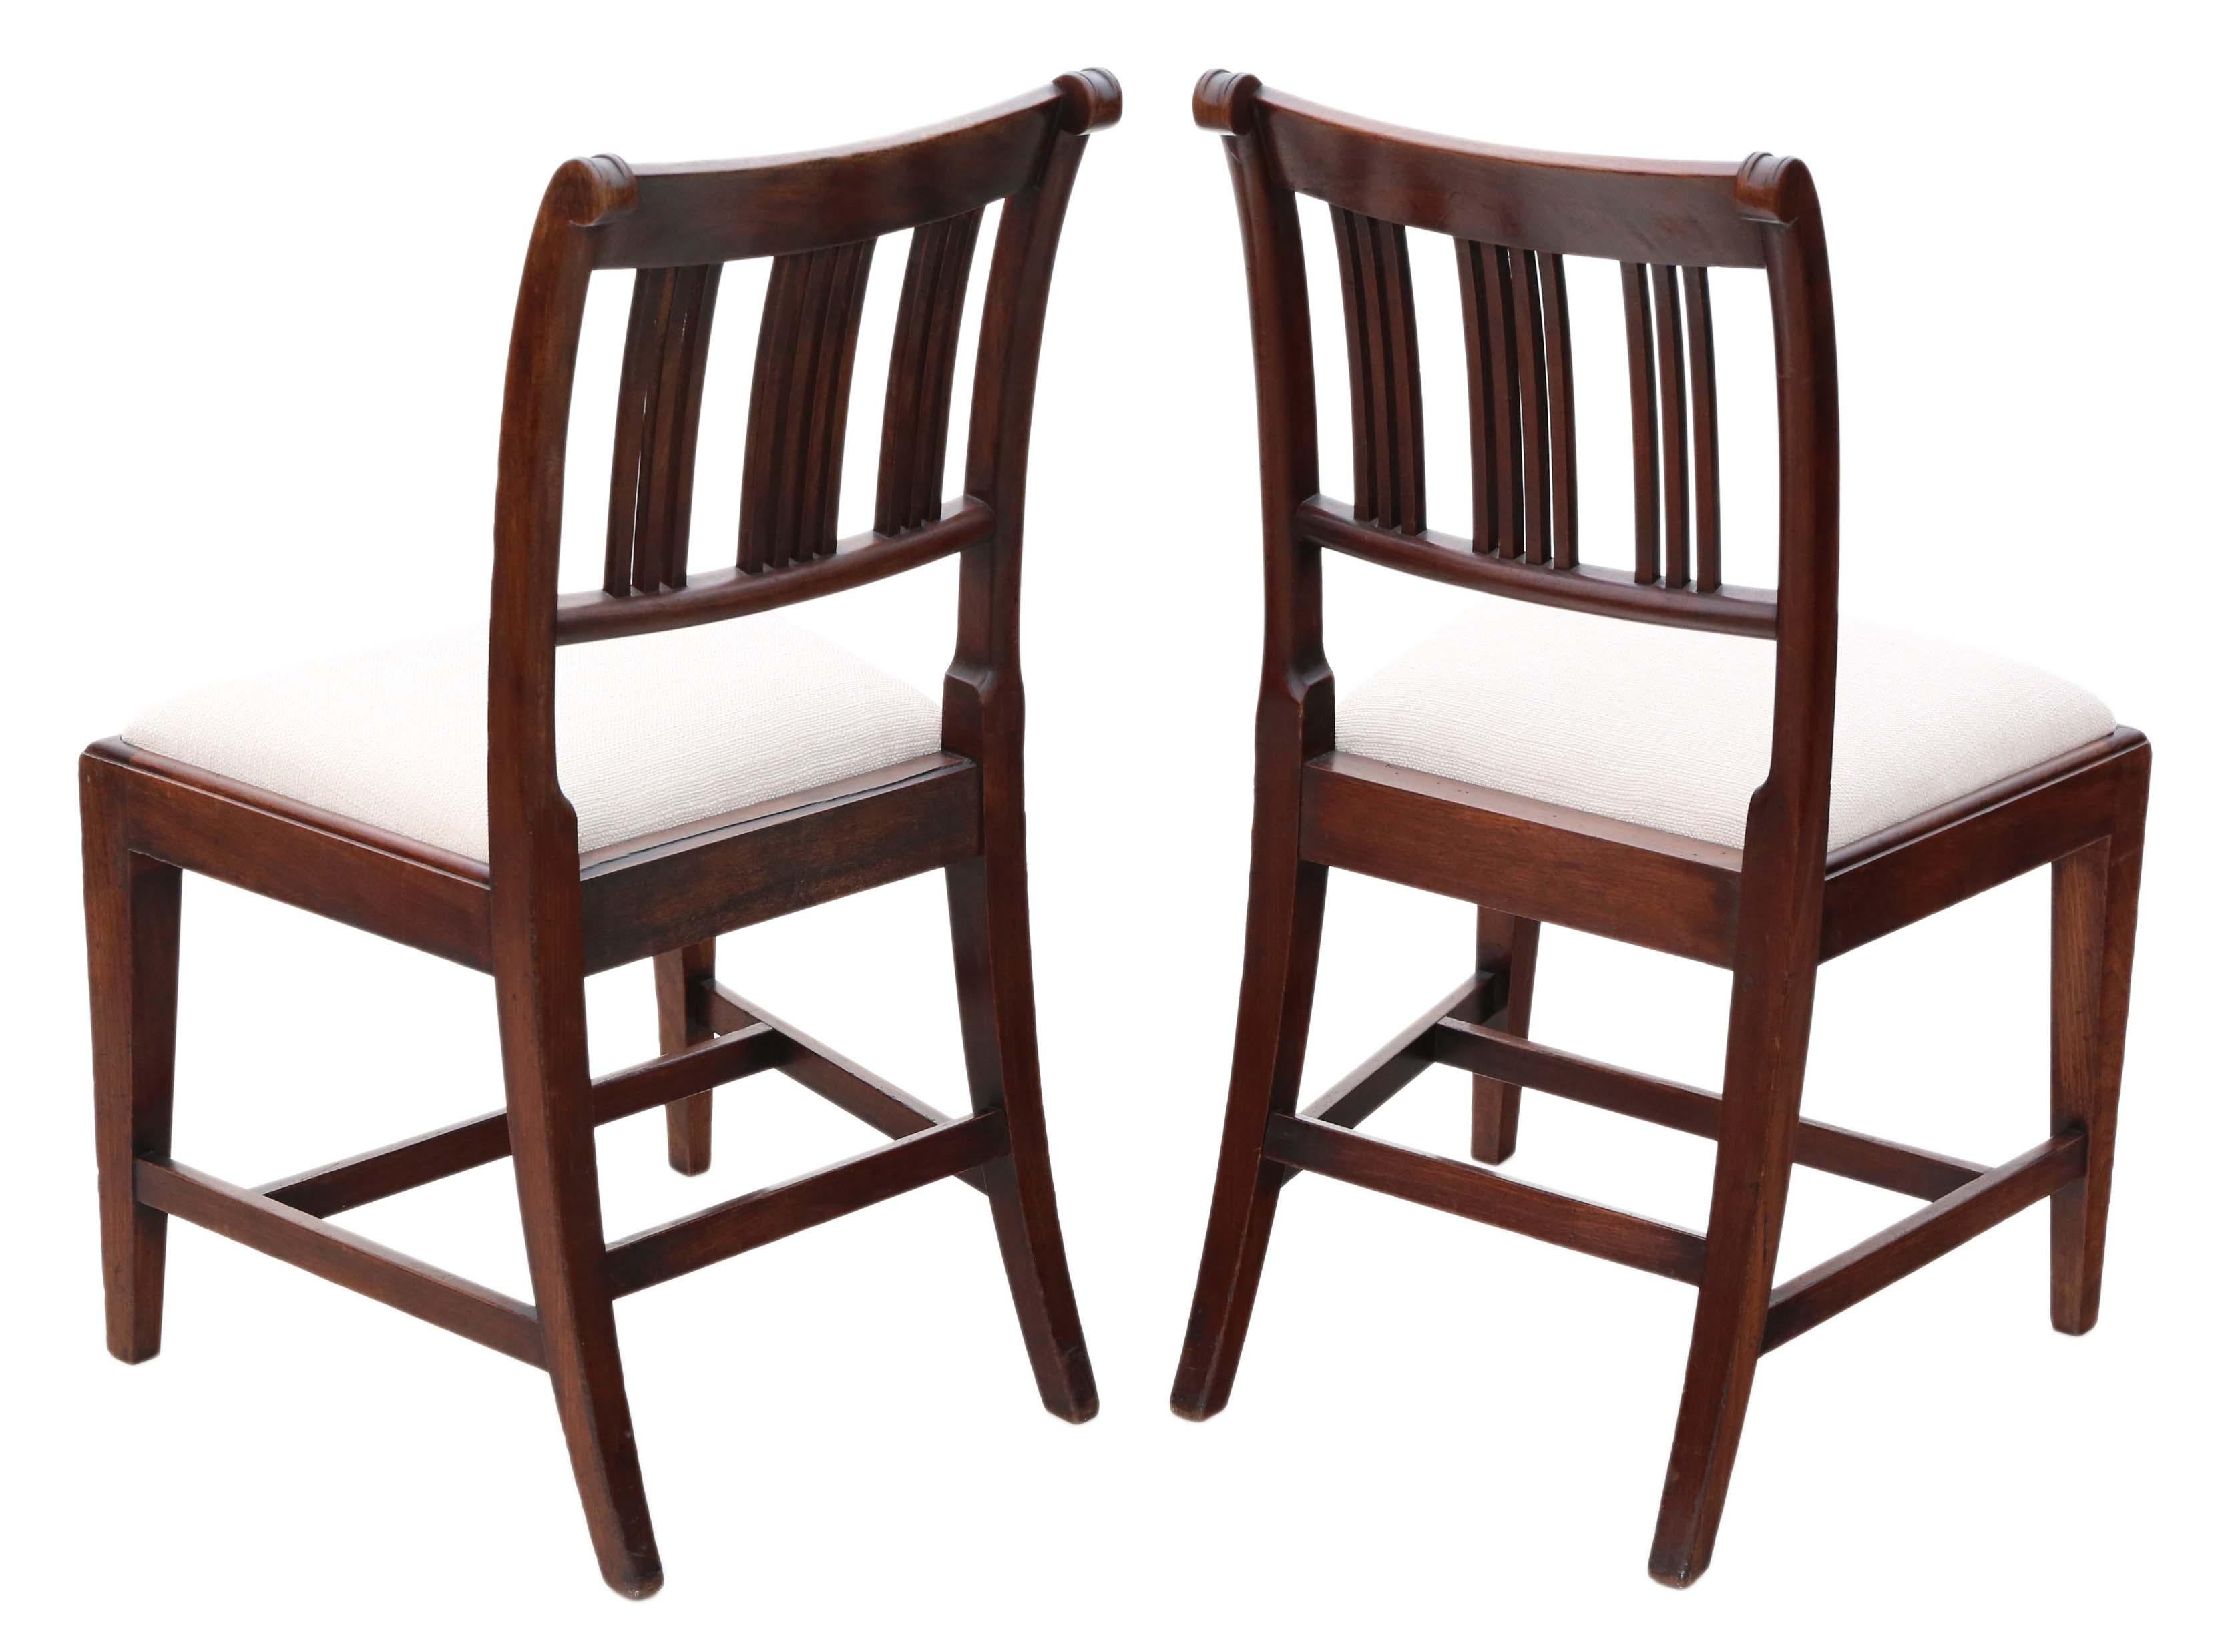 Antique quality pair of Georgian 19th century mahogany dining side hall or bedroom chairs.

Date from circa 1810.

Solid, with no loose joints.

New upholstery in a heavy weight upholstery fabric, with an off-white color.

Overall maximum